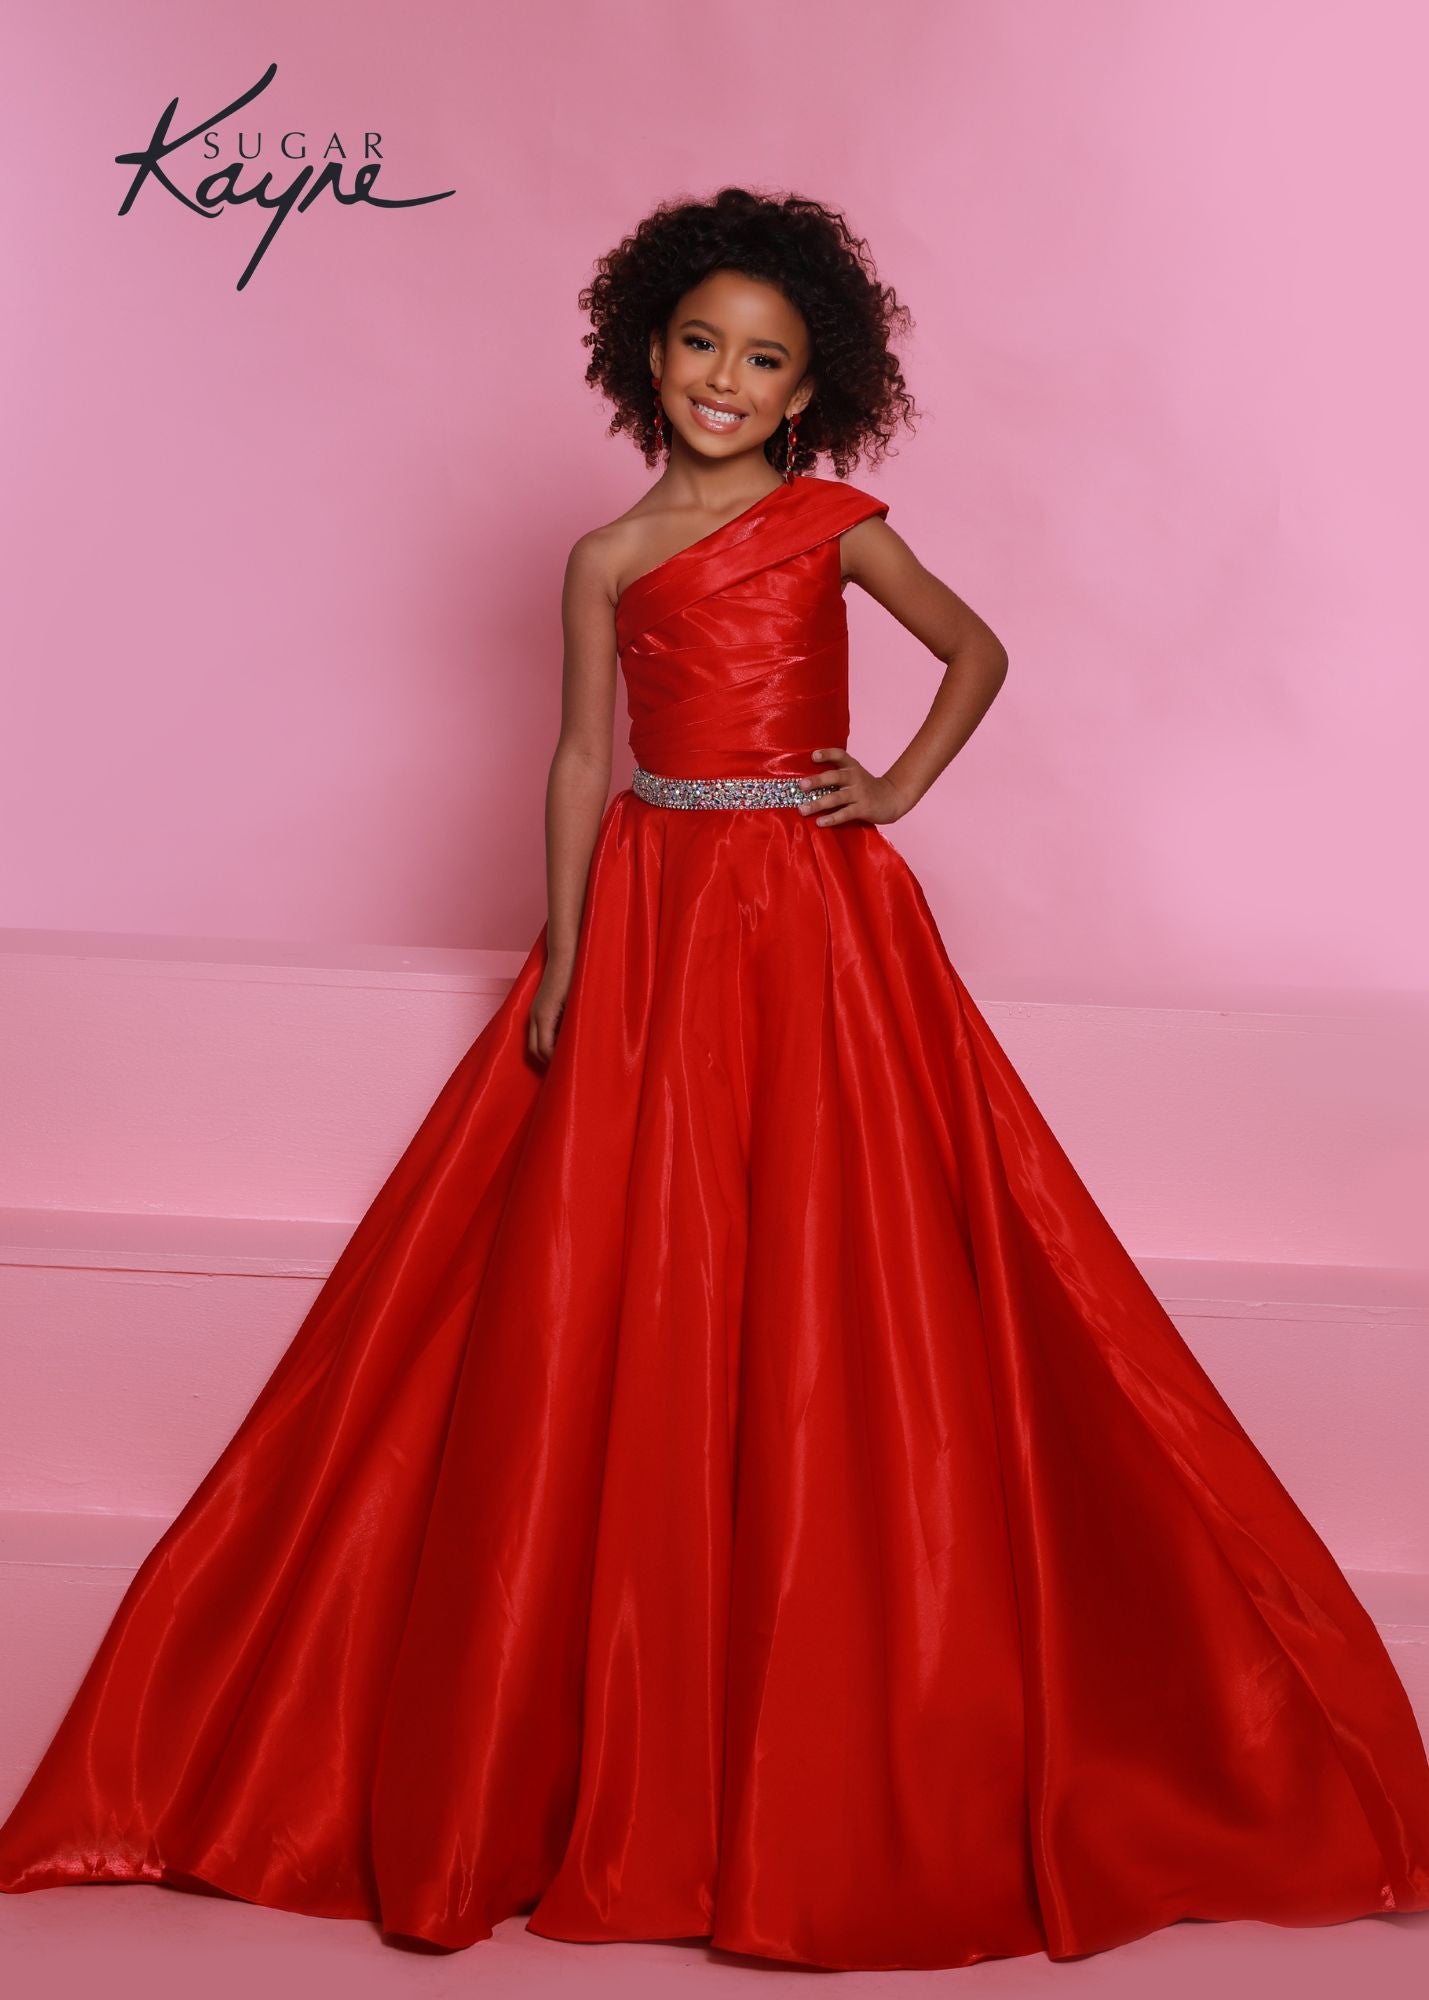 Sugar Kayne C312 Girls Long A Line One Shoulder Formal Pageant Dress Gathered Bodice Make a bold impression at your next pageant. This one-shoulder shimmer satin ball gown has a hand-beaded waistband to highlight the waist.  Colors: Cherry, White  Sizes: 2, 4, 6, 8, 10, 12, 14, 16  Fabric Shimmer Satin, Satin Lining